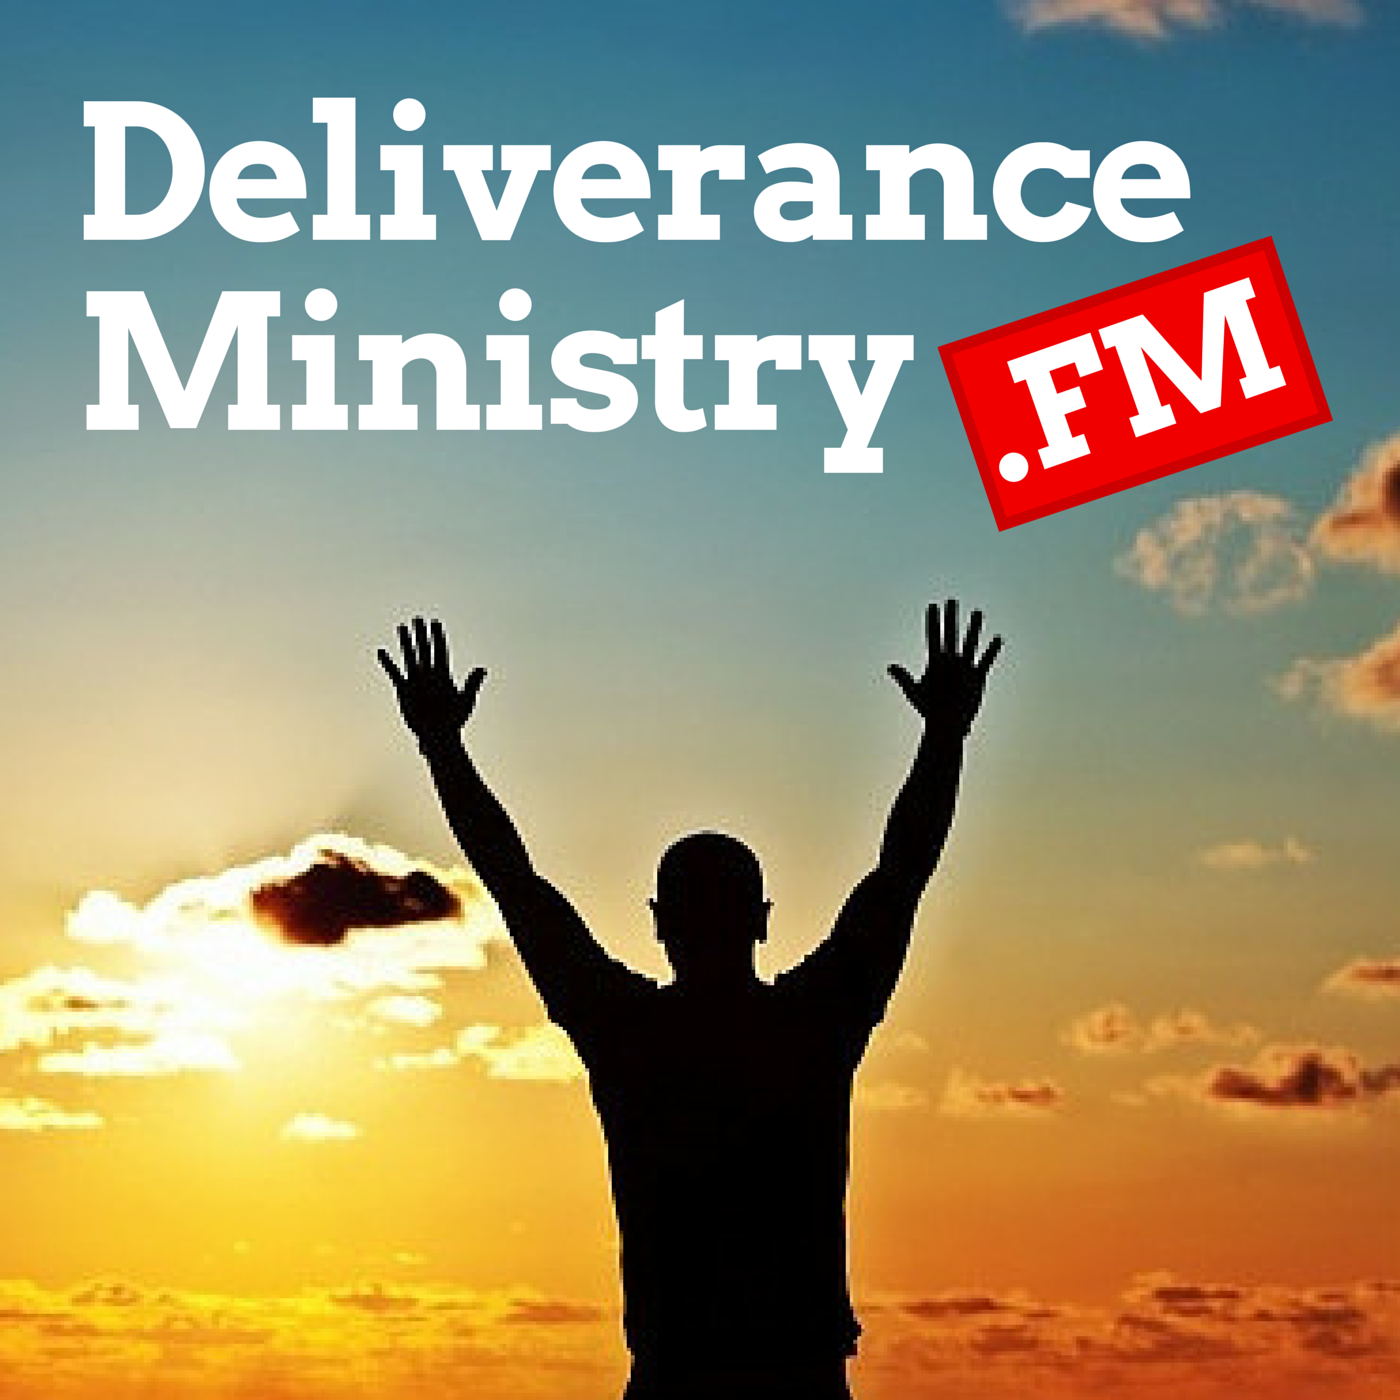 Deliverance Ministryfm Above And Beyond Christian Counseling 